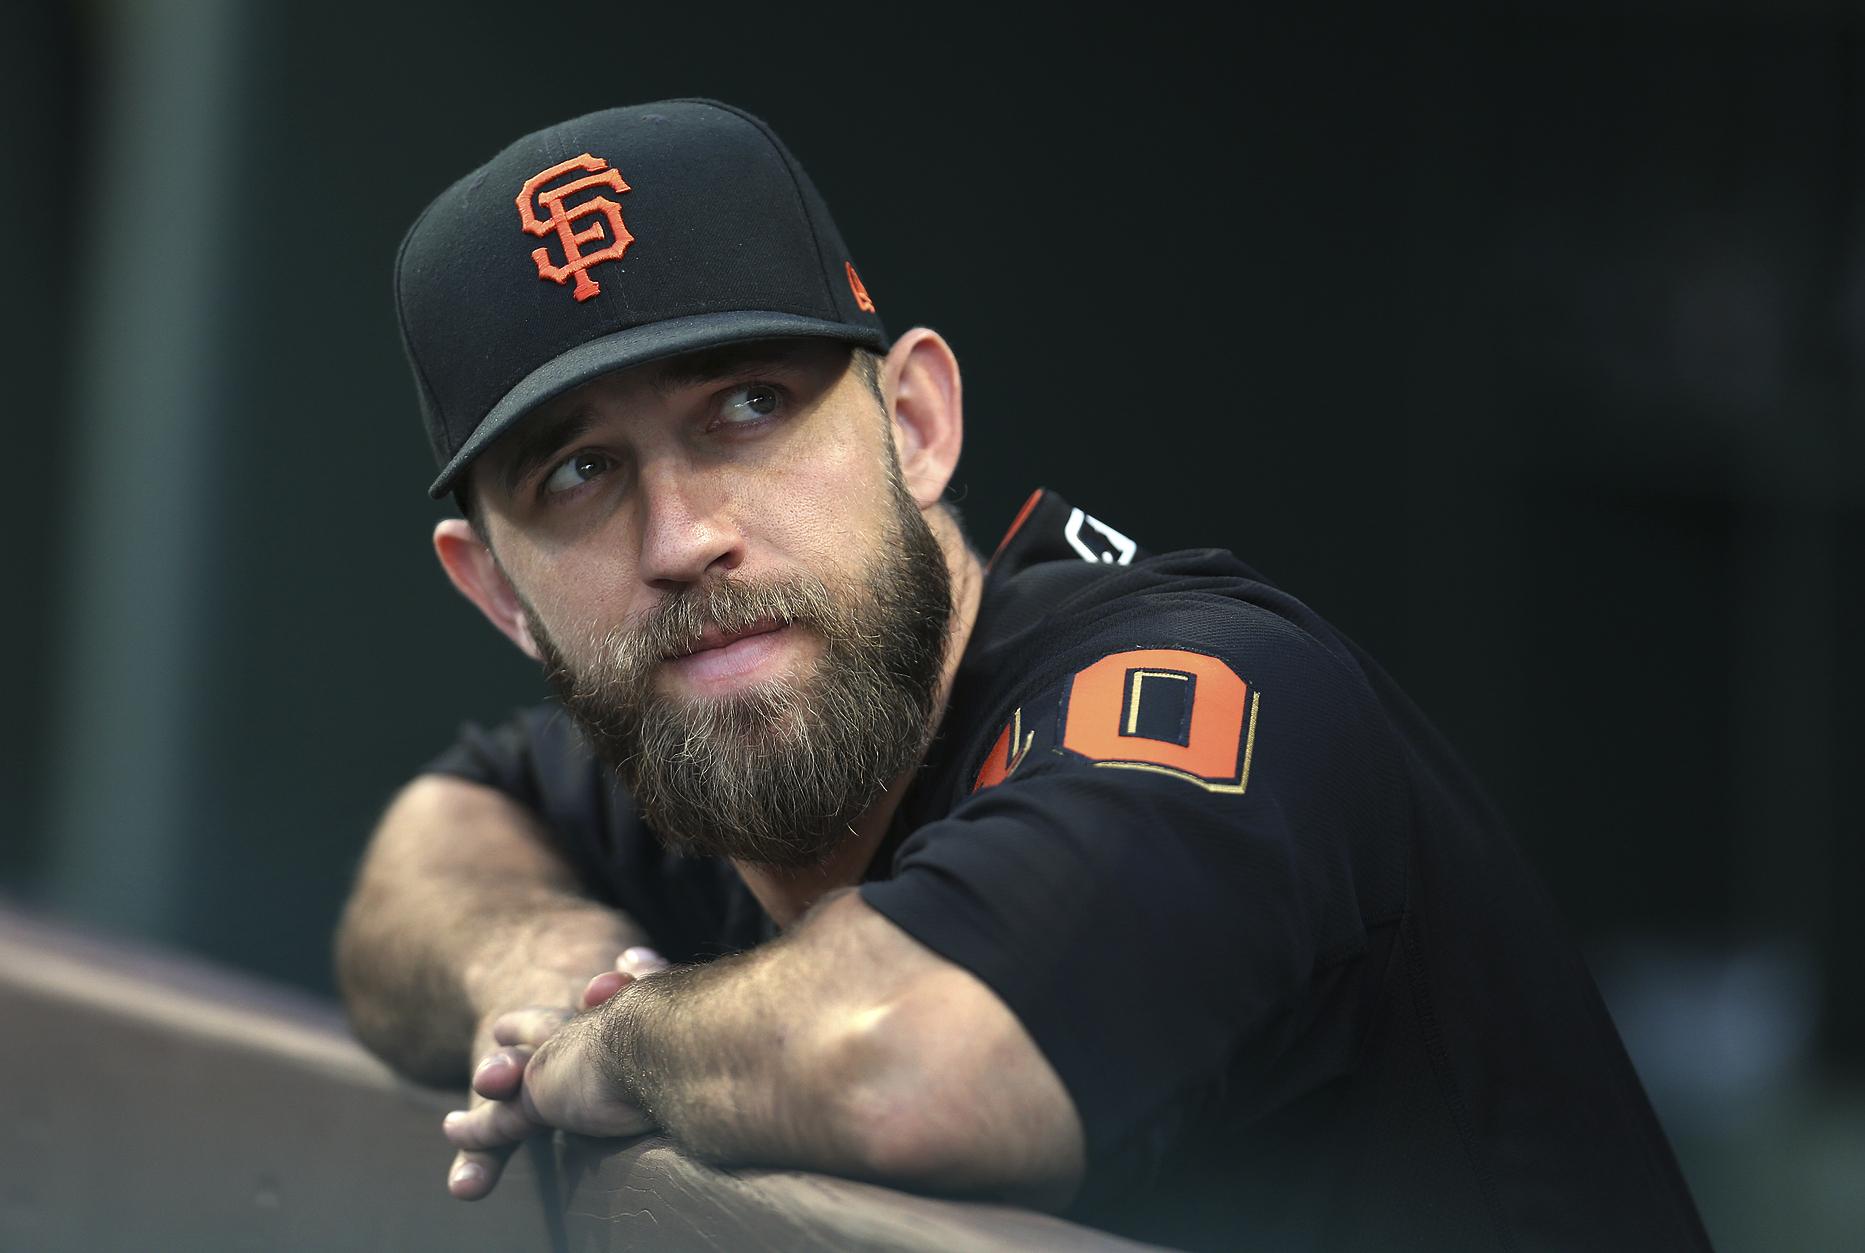 Giants' Madison Bumgarner: Rule changes 'kind of getting out of hand